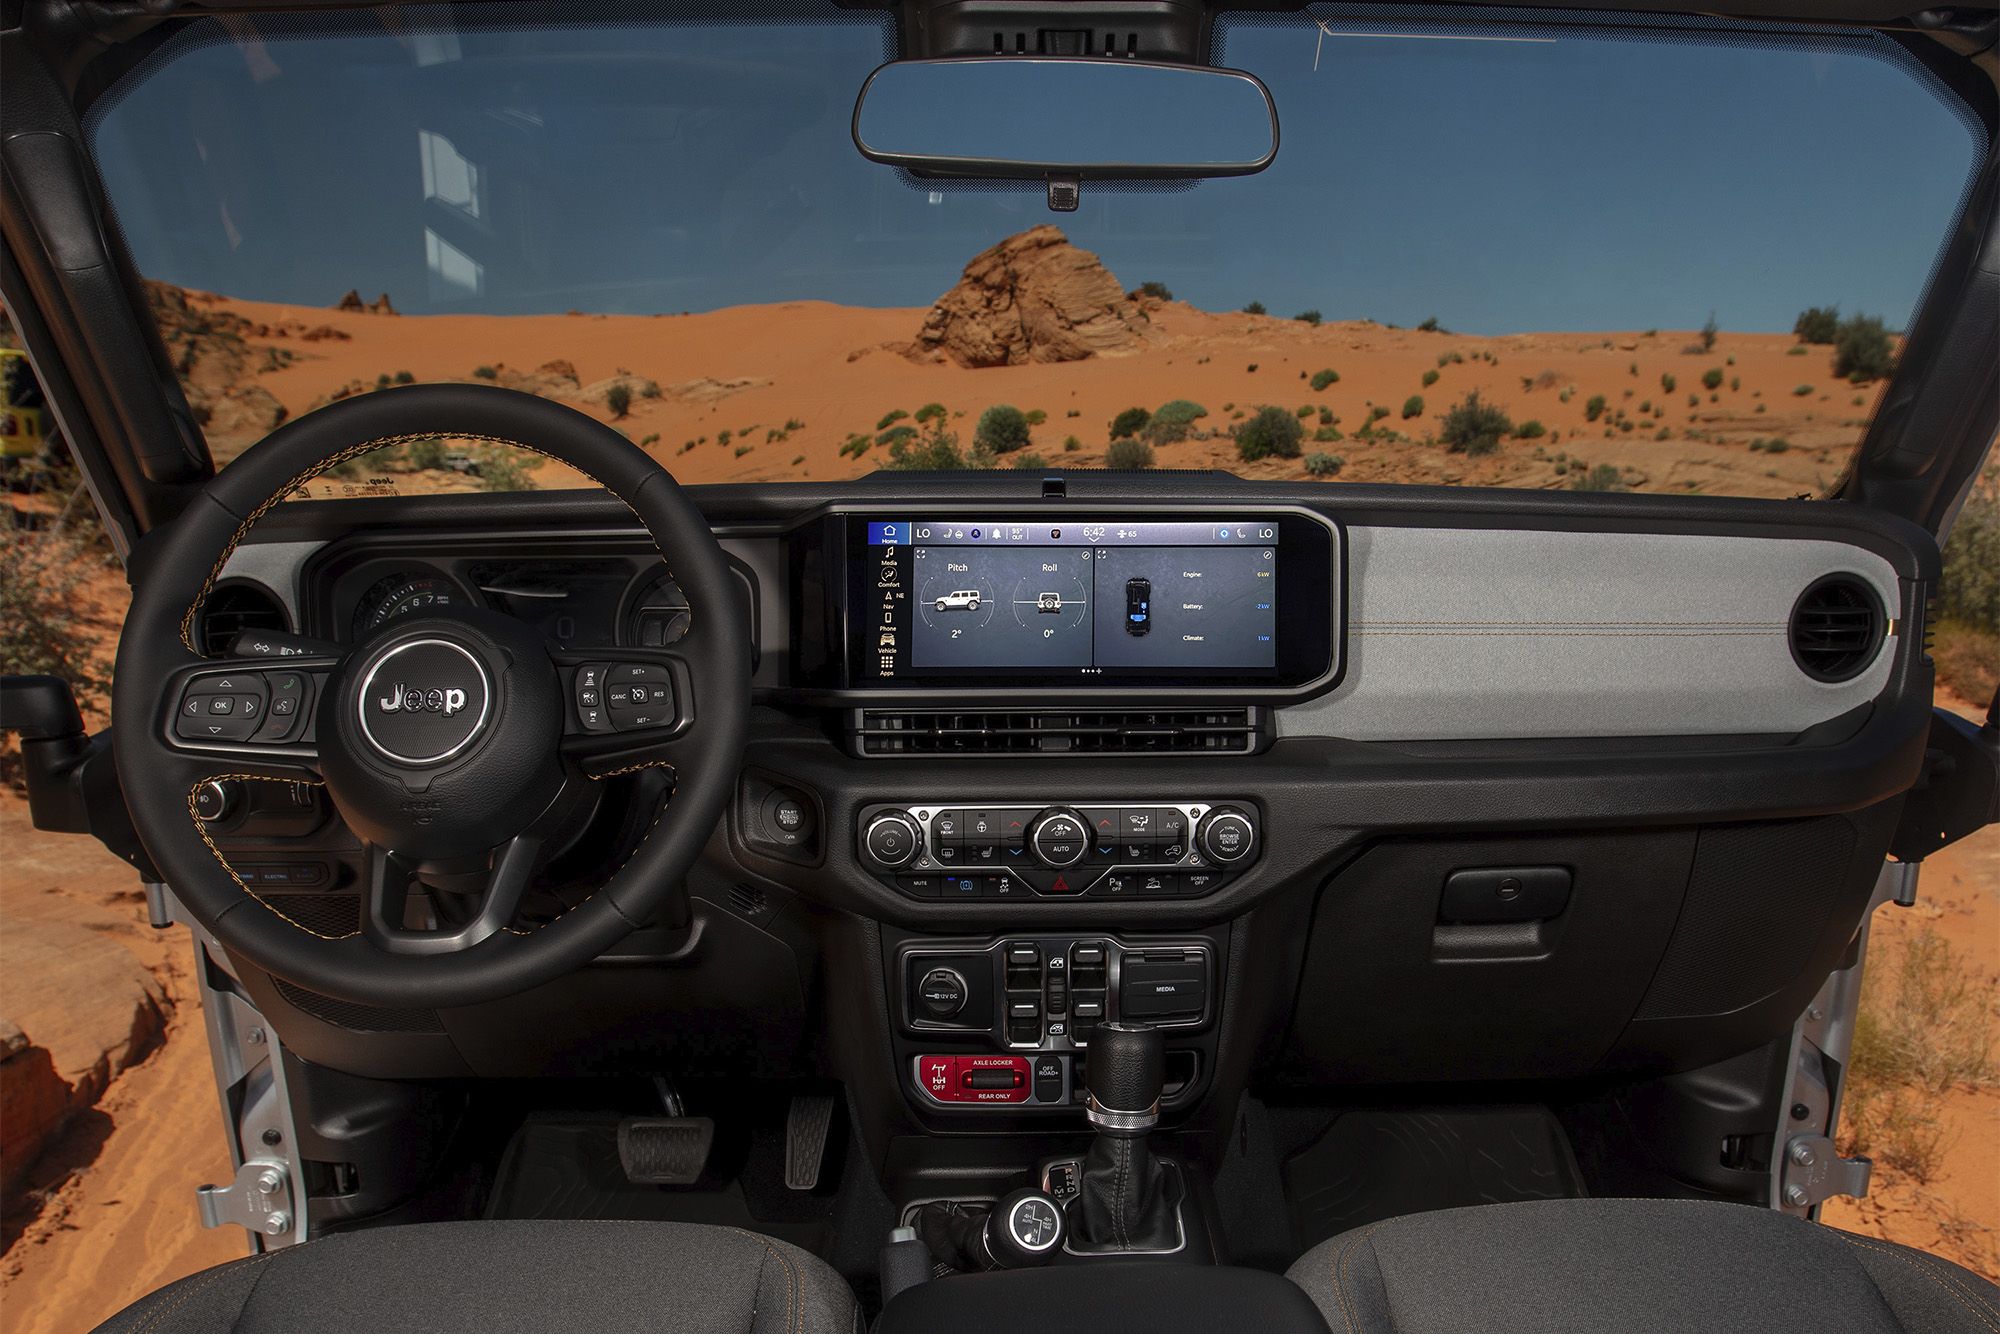 Jeep Wrangler shot of dashboard, window looks out onto desert